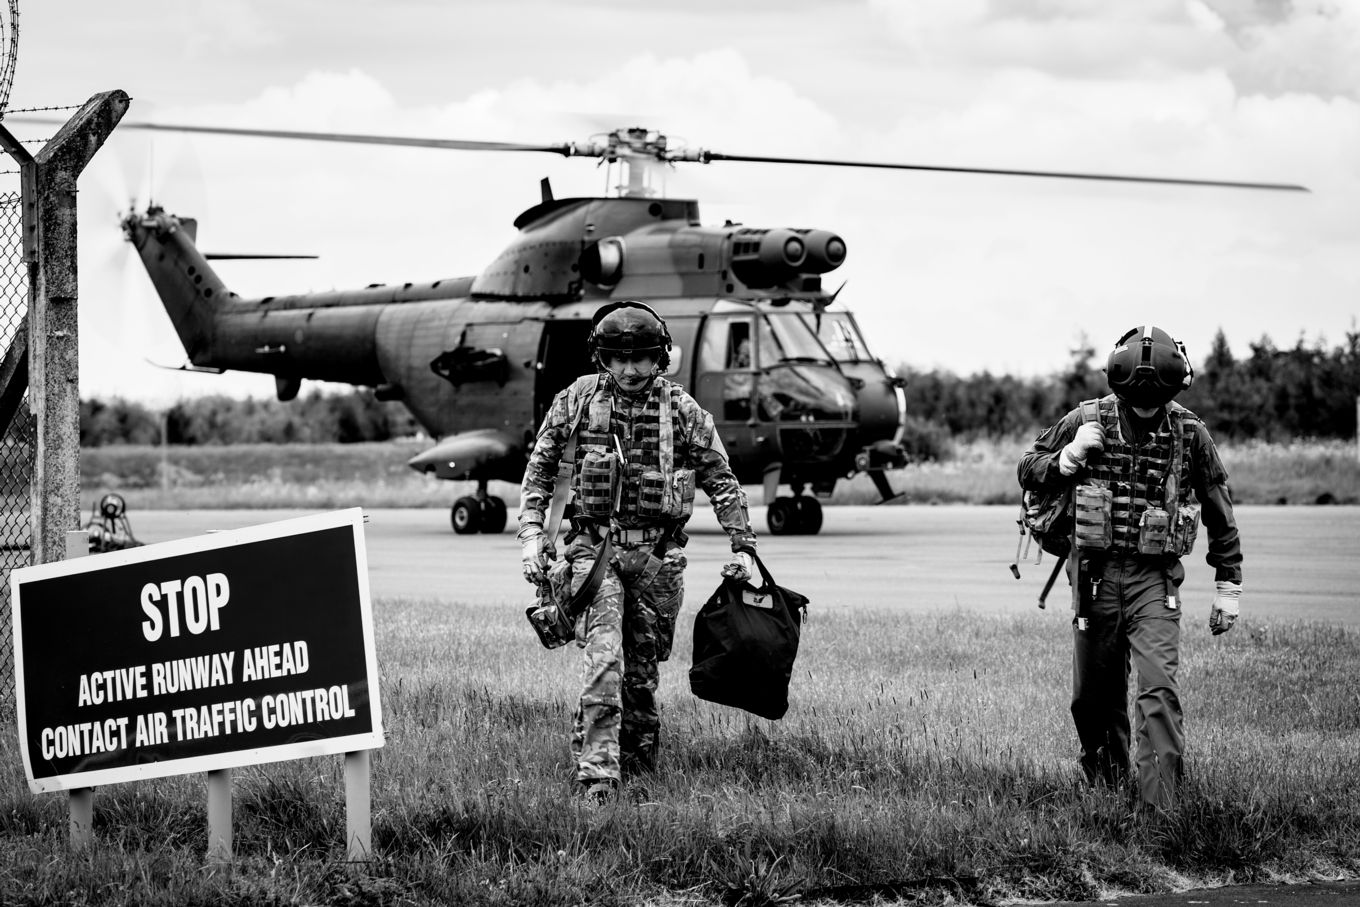 Ground Crew walking from a Puma Aircraft